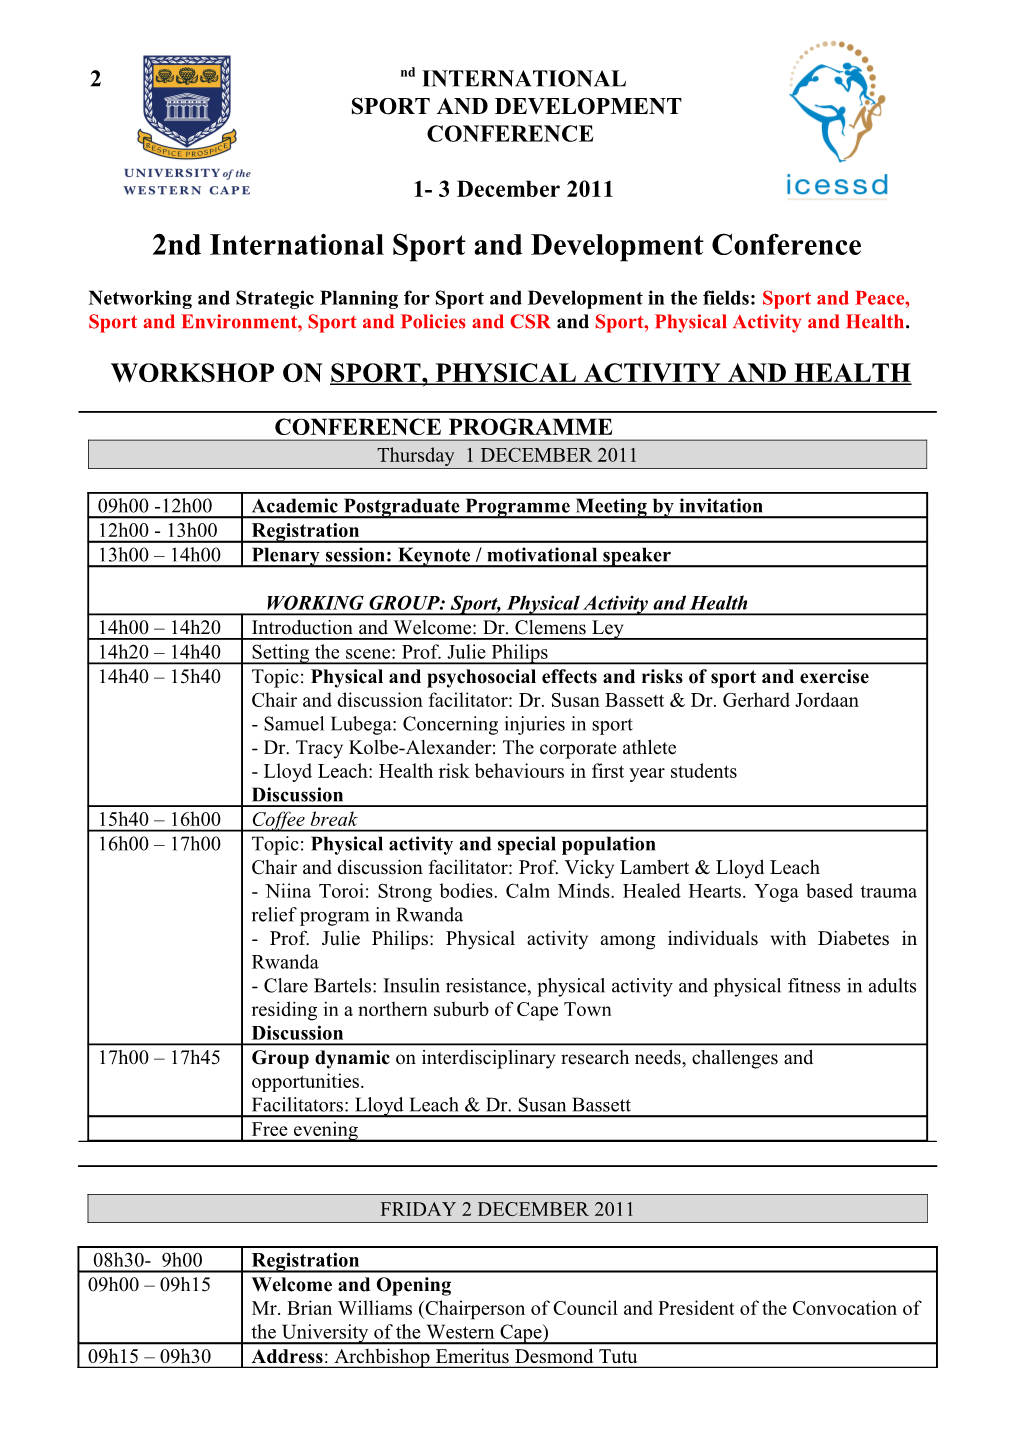 2Nd International Sport and Development Conference